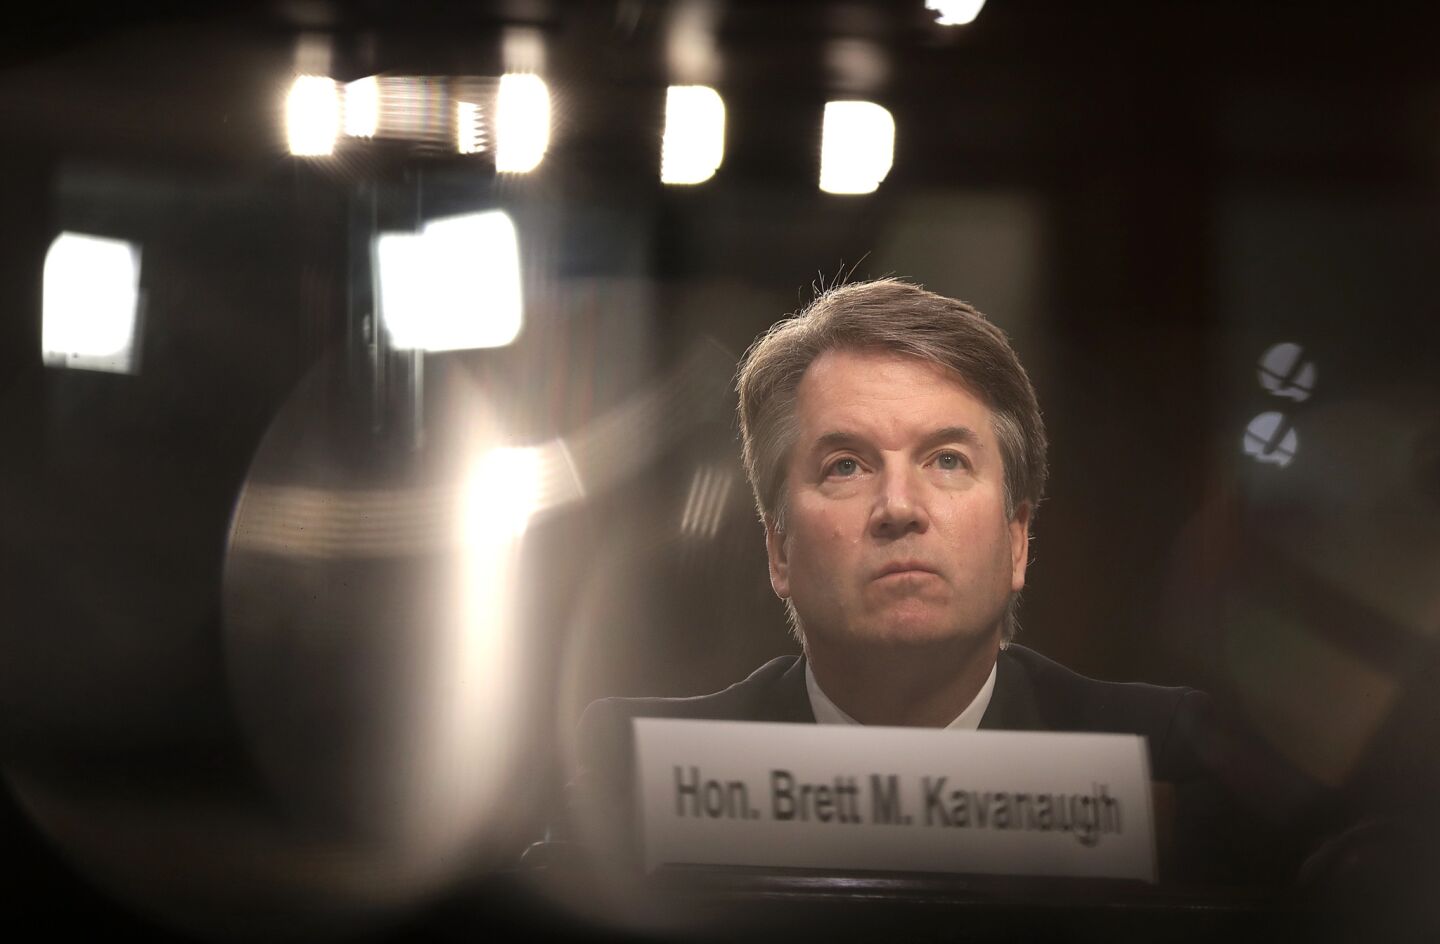 Judge Brett Kavanaugh appears before the Senate Judiciary Committee during his Supreme Court confirmation hearing.